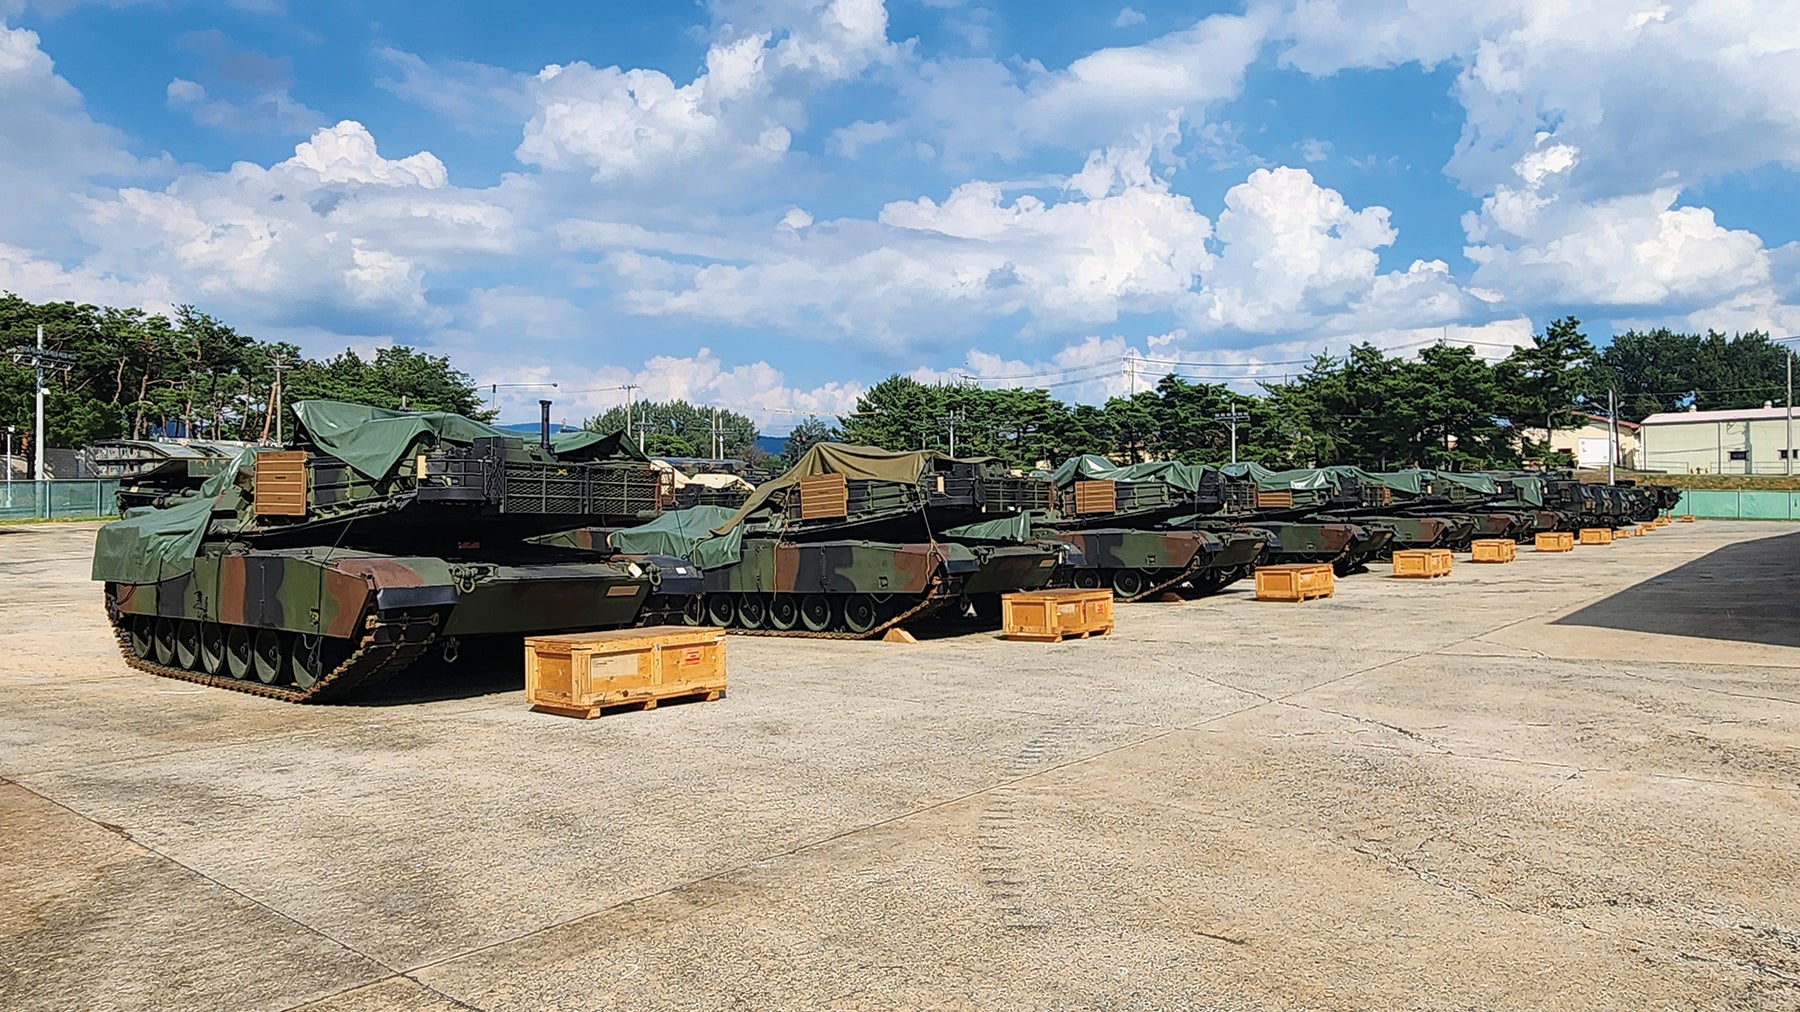 Equipment for a combined arms battalion from Army Prepositioned Stock-4 is staged at Camp Carroll, South Korea. (Credit: U.S. Army/Capt. Nathan Mumford)